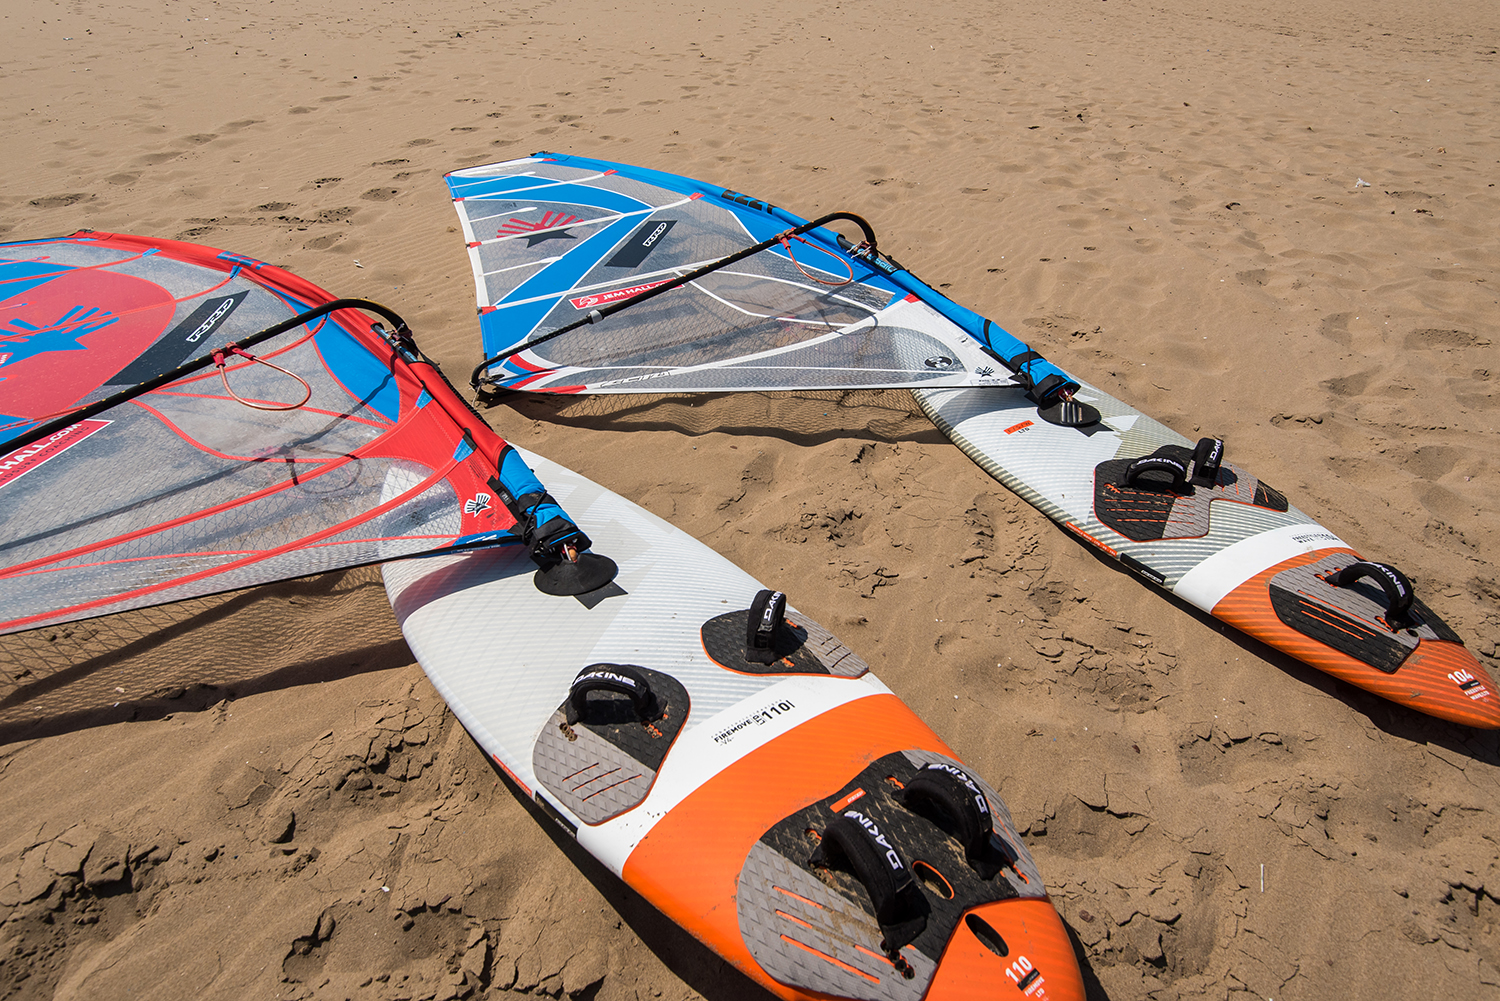 6.5 and 5.8 are interchangeable on both freemove 110 and FSW 104 boards and are an option in Jem’s recommended 3 / 2 Minimum quiver. Photo by Eye Sea You.